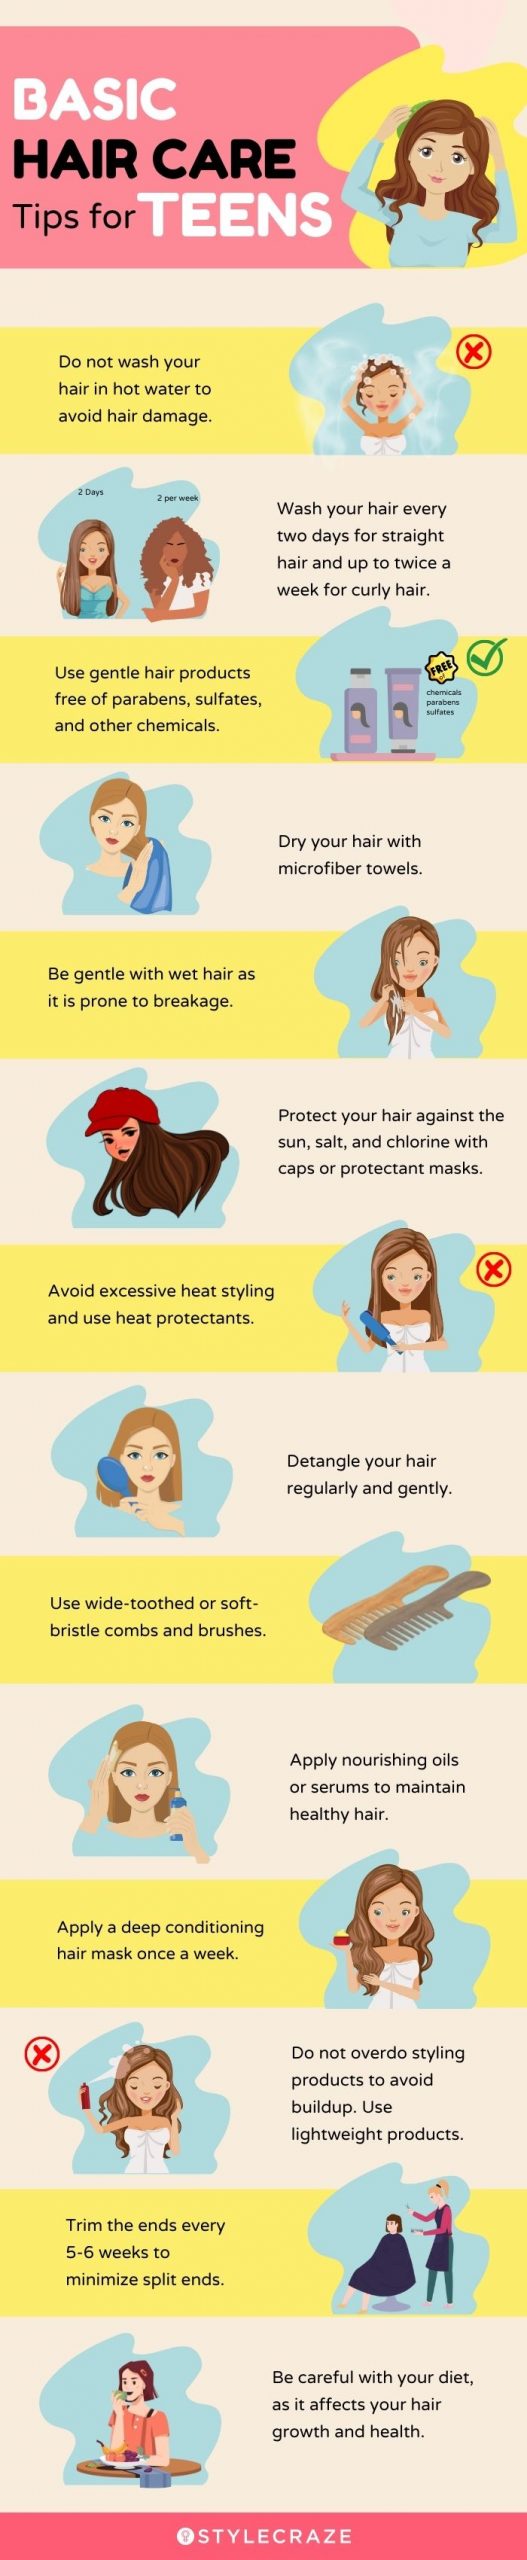 basic hair care tips for teens (infographic)